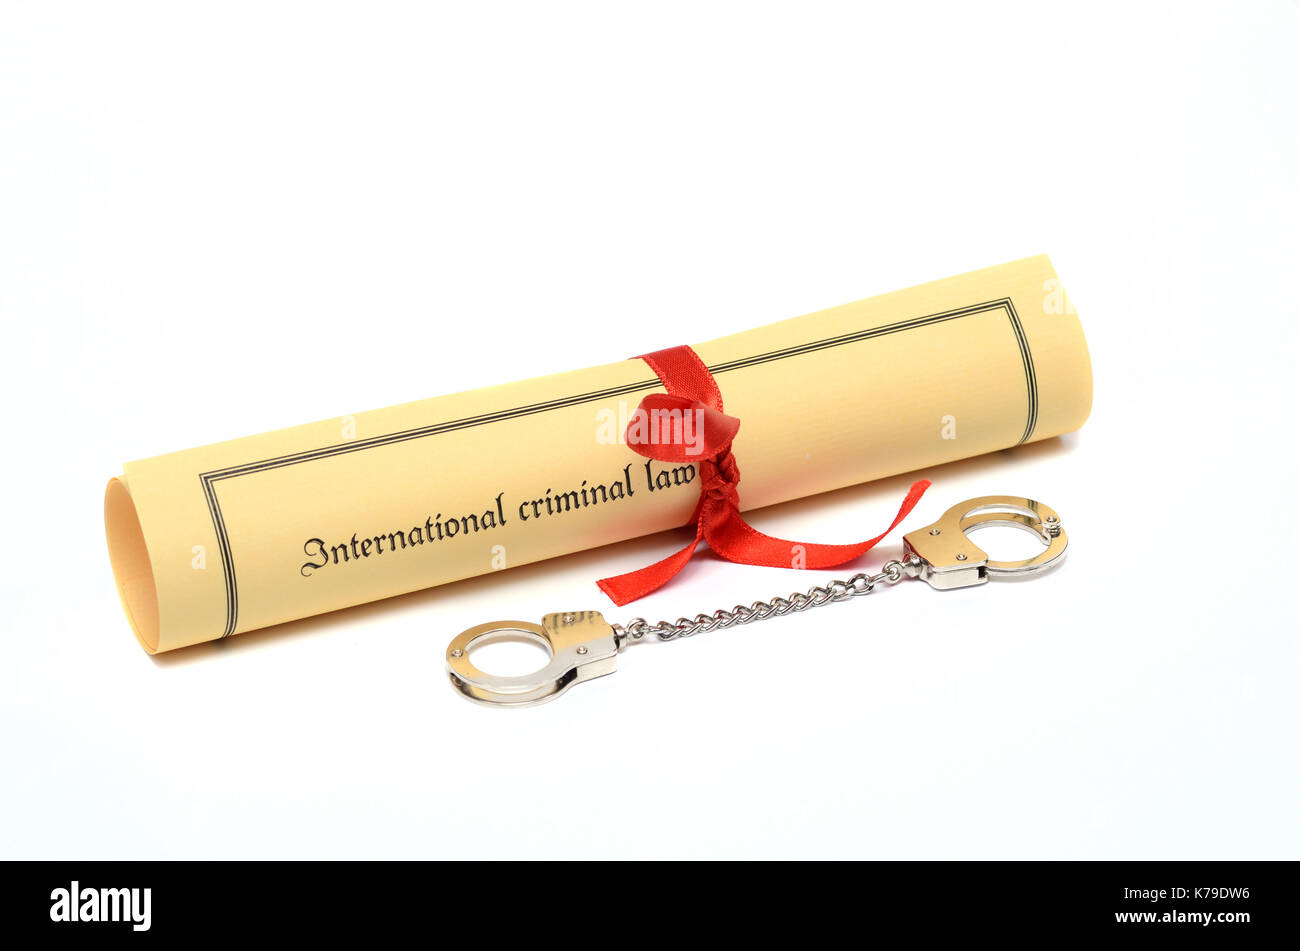 Handcuffs and International criminal law, law concept, isolated on the white background. Stock Photo